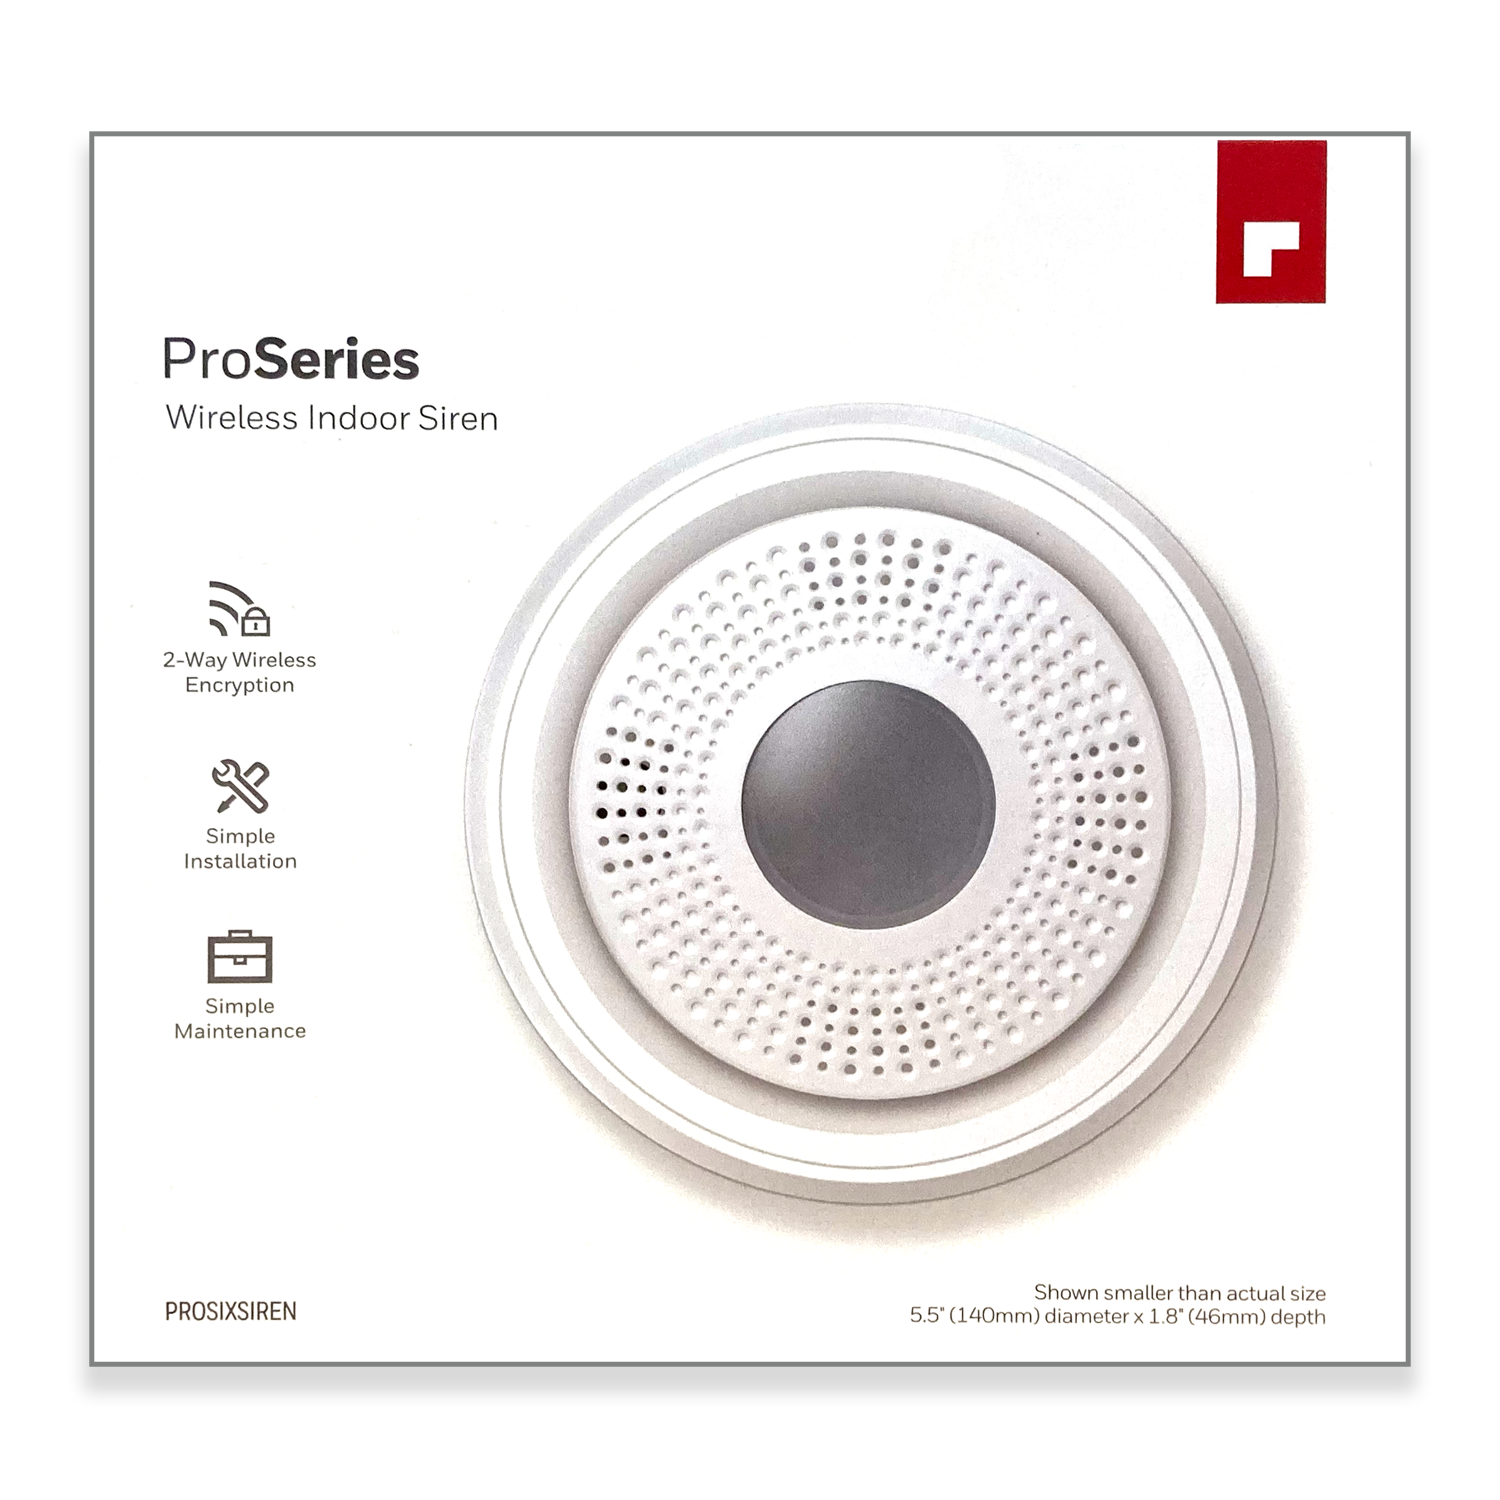 Sold by Miele Manufacturing. This siren delivers big benefits to you and your customers: easy professional installation, remote monitoring/diagnostics, 128-bit AES encryption and tamper protection.